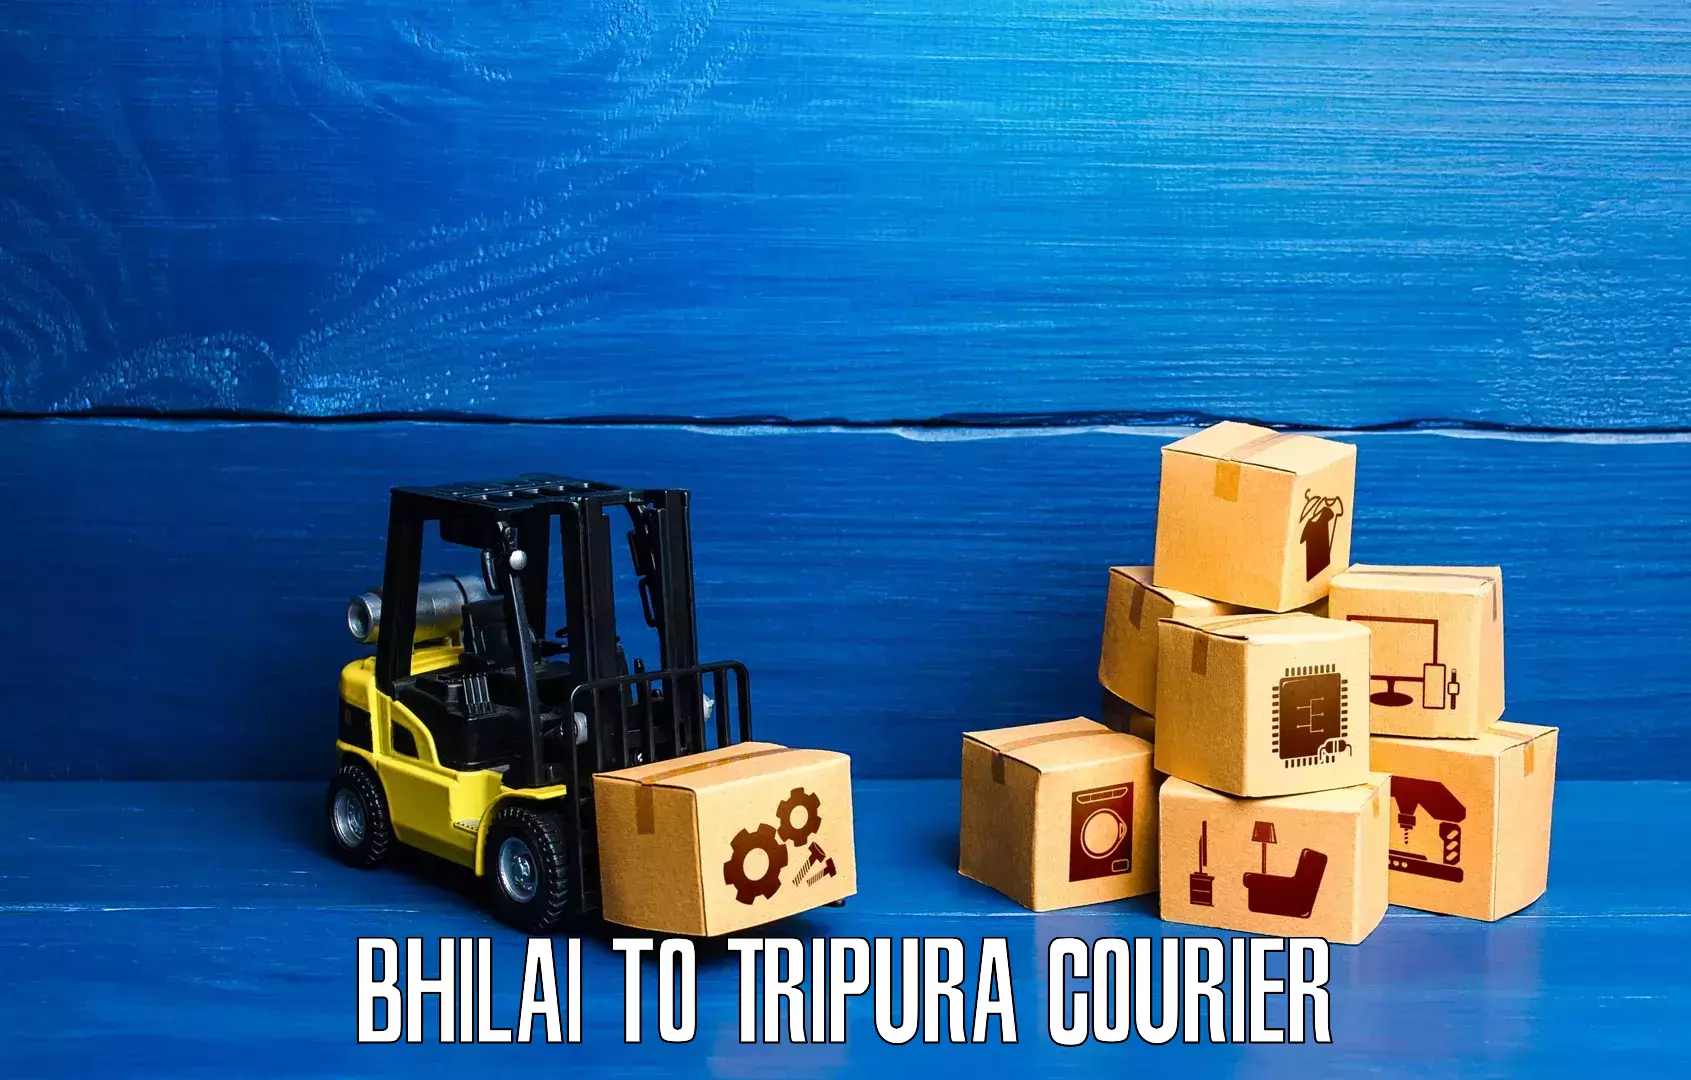 Express delivery capabilities in Bhilai to Khowai